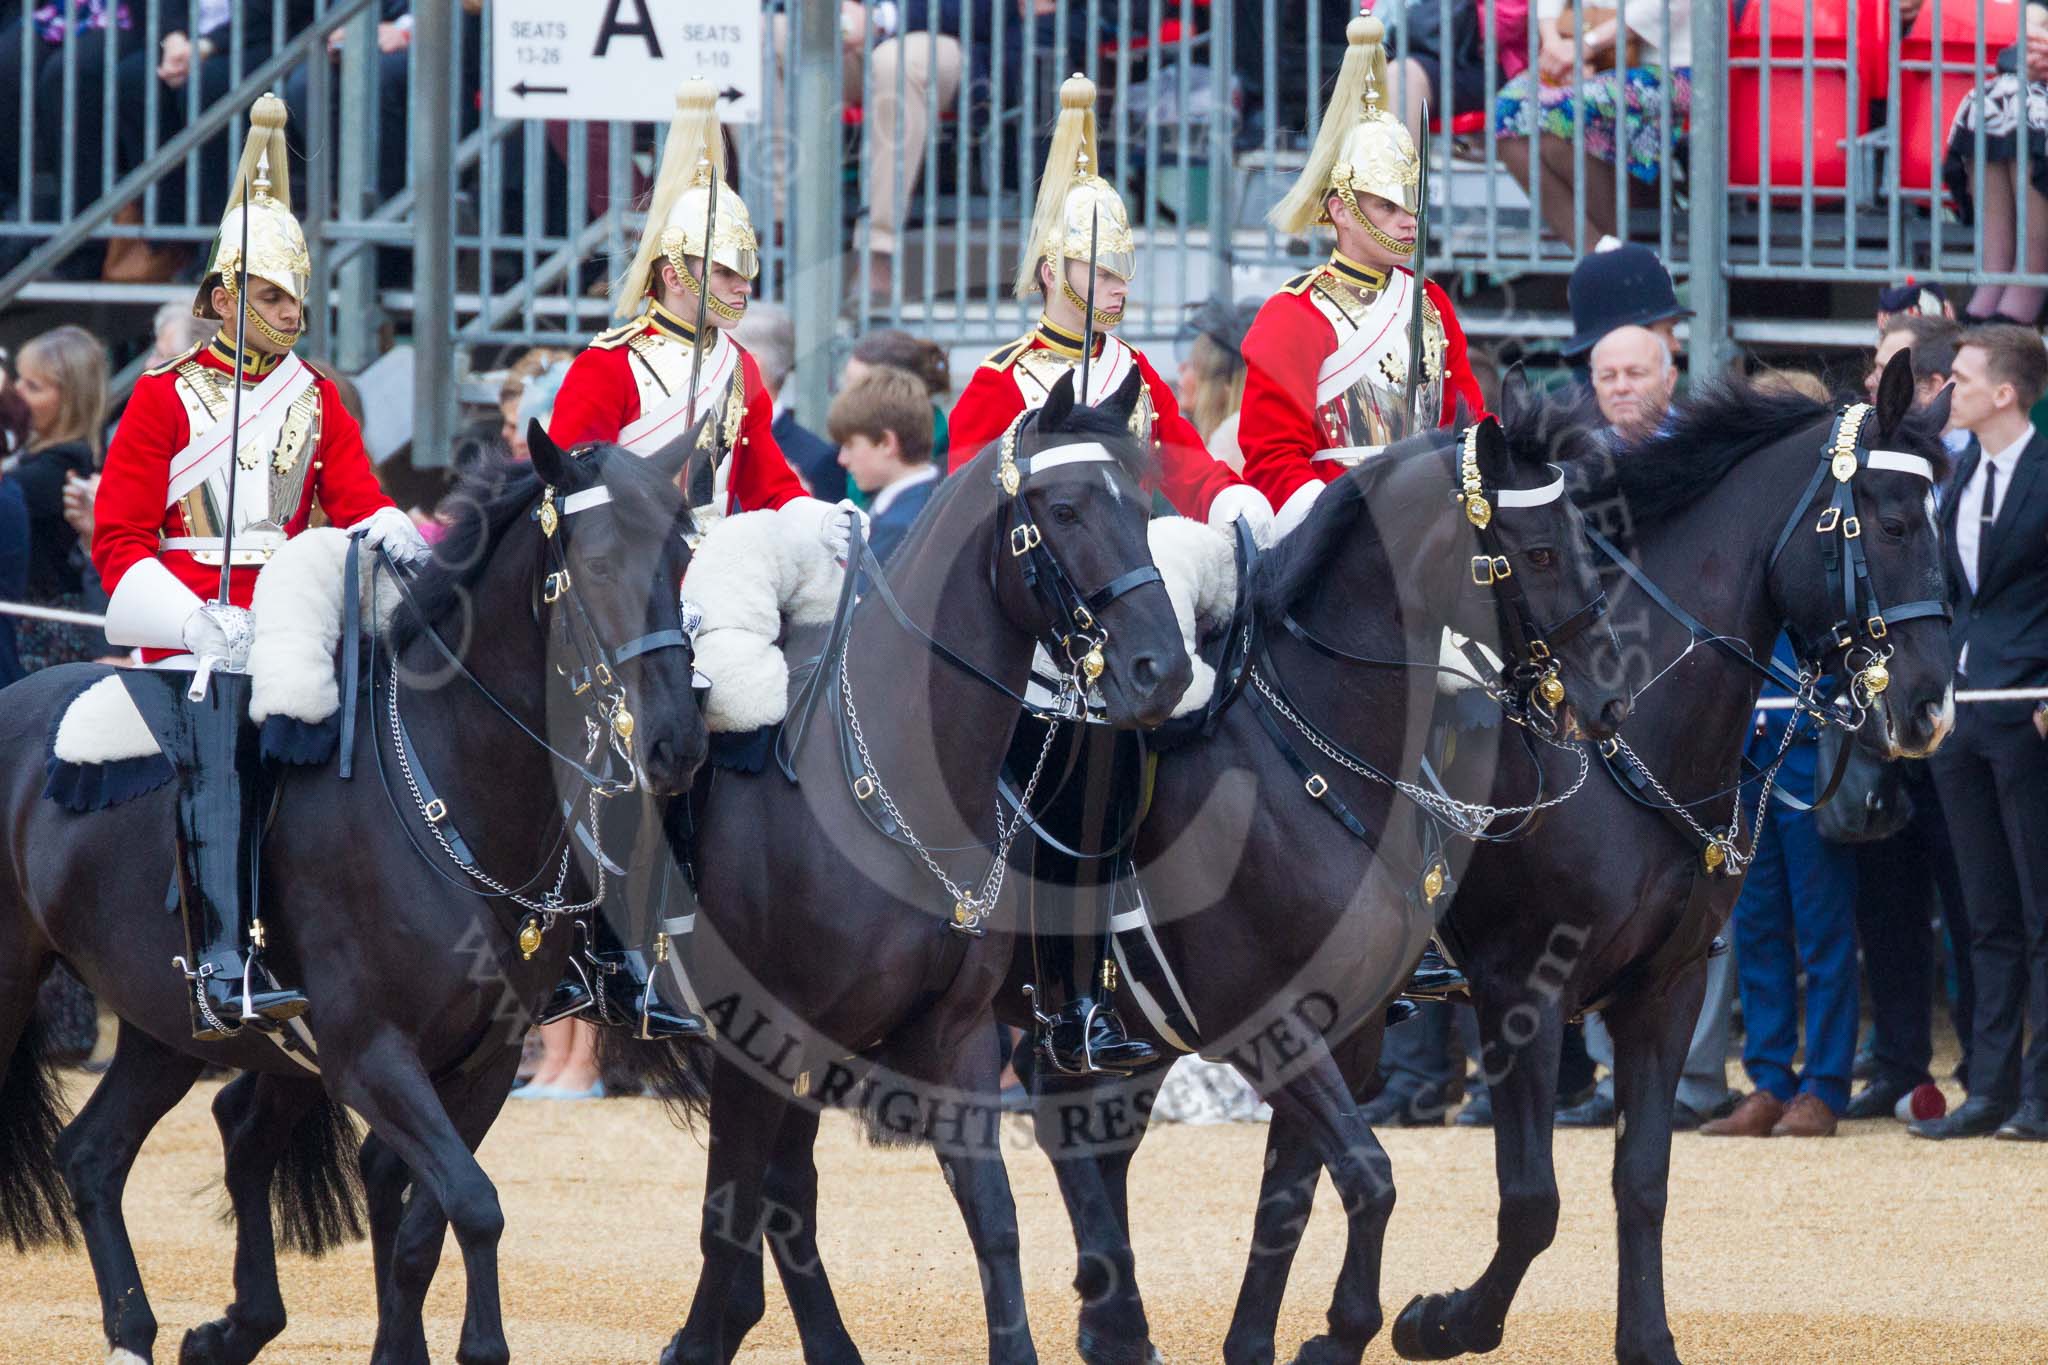 Trooping the Colour 2015. Image #219, 13 June 2015 10:56 Horse Guards Parade, London, UK